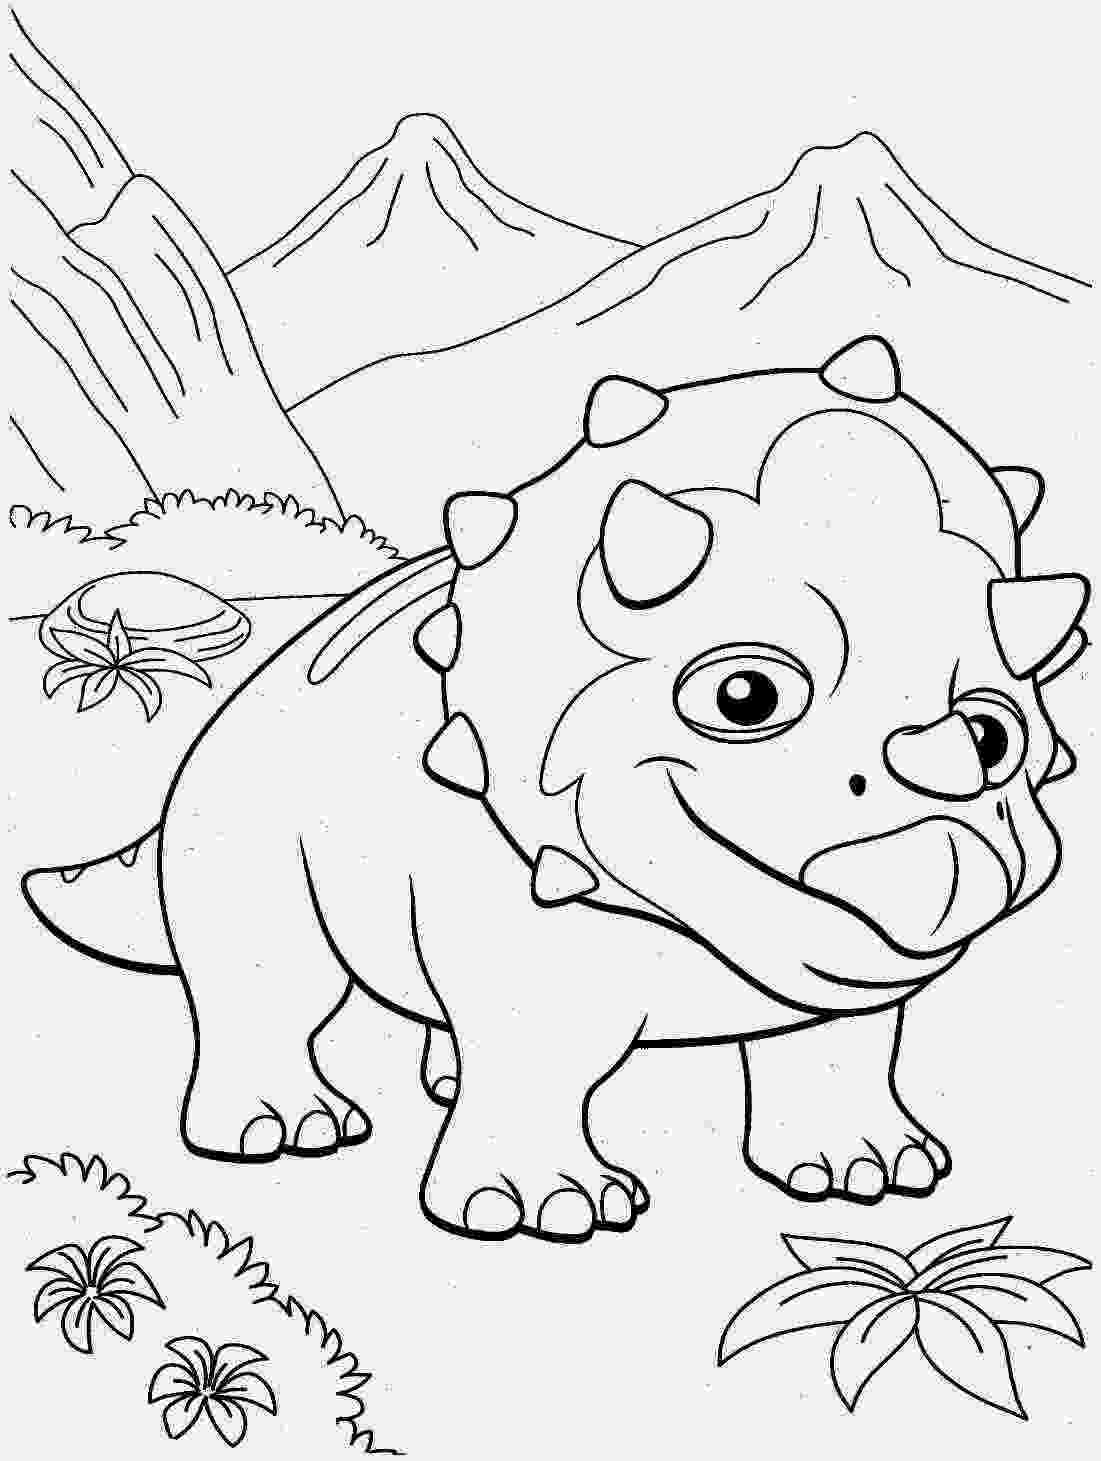 dinosaur colouring page coloring pages dinosaur free printable coloring pages colouring page dinosaur 